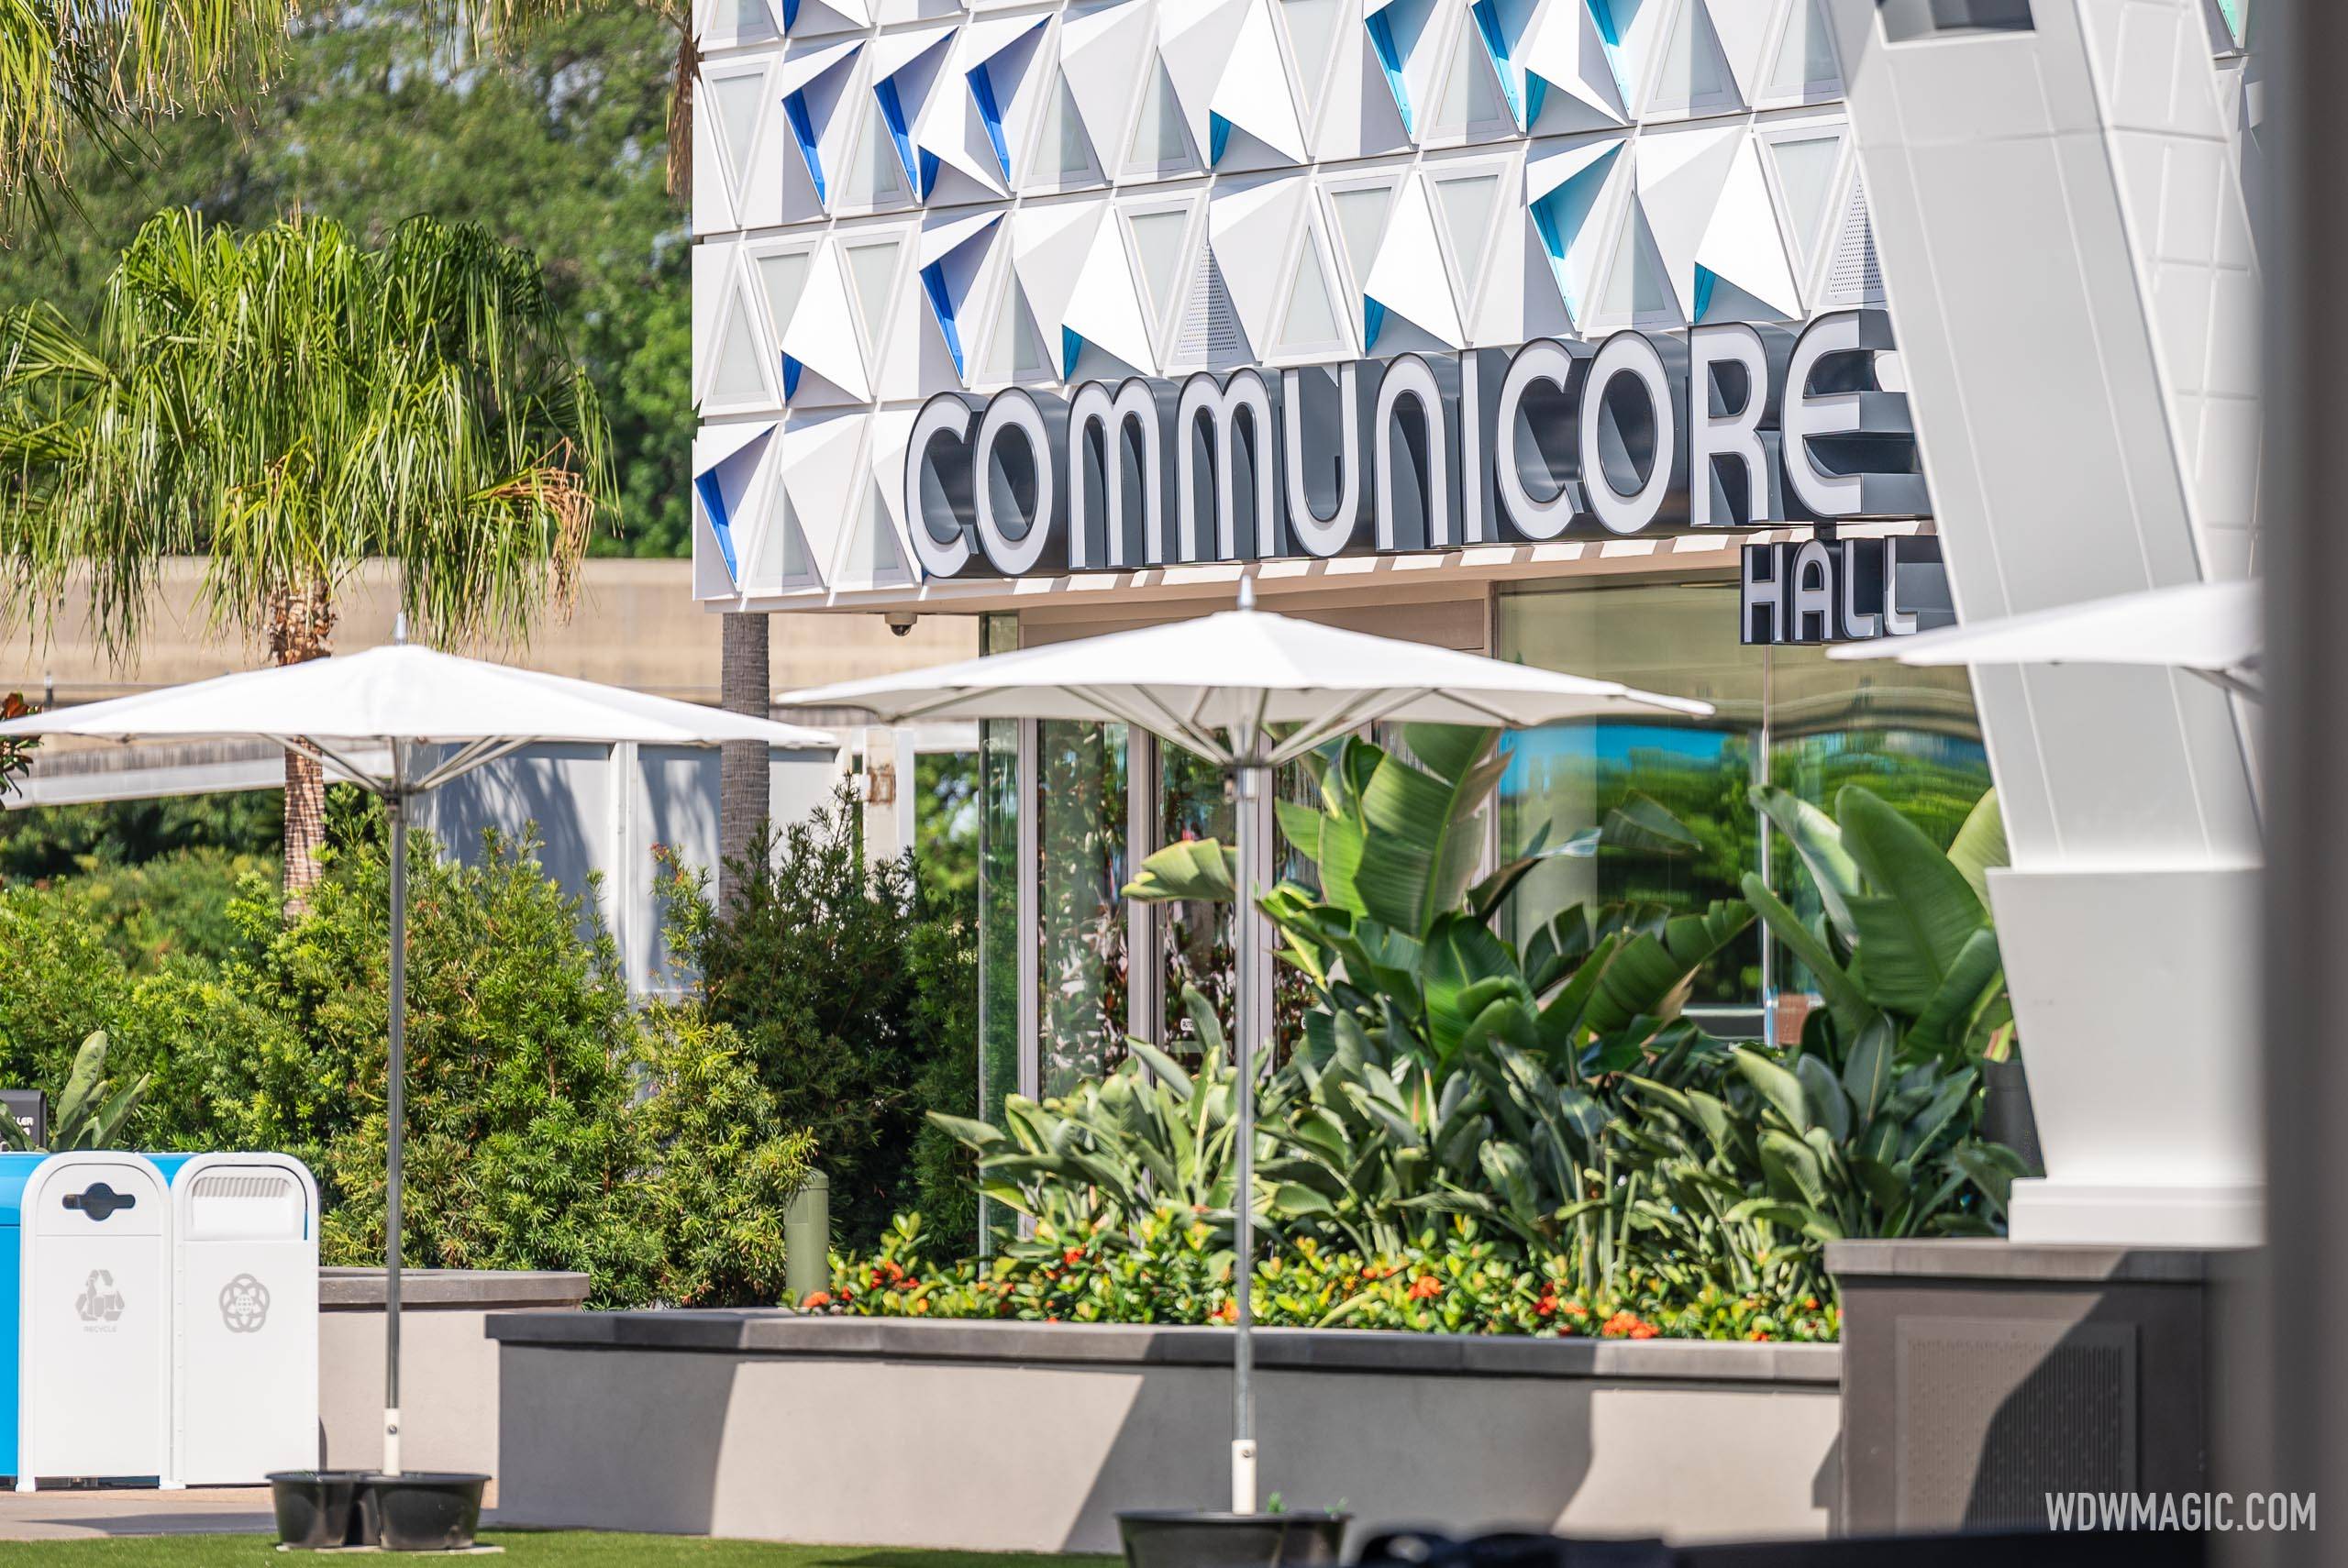 New Details Unveiled for EPCOT's CommuniCore Hall,CommuniCore Plaza, and Festival Favorites